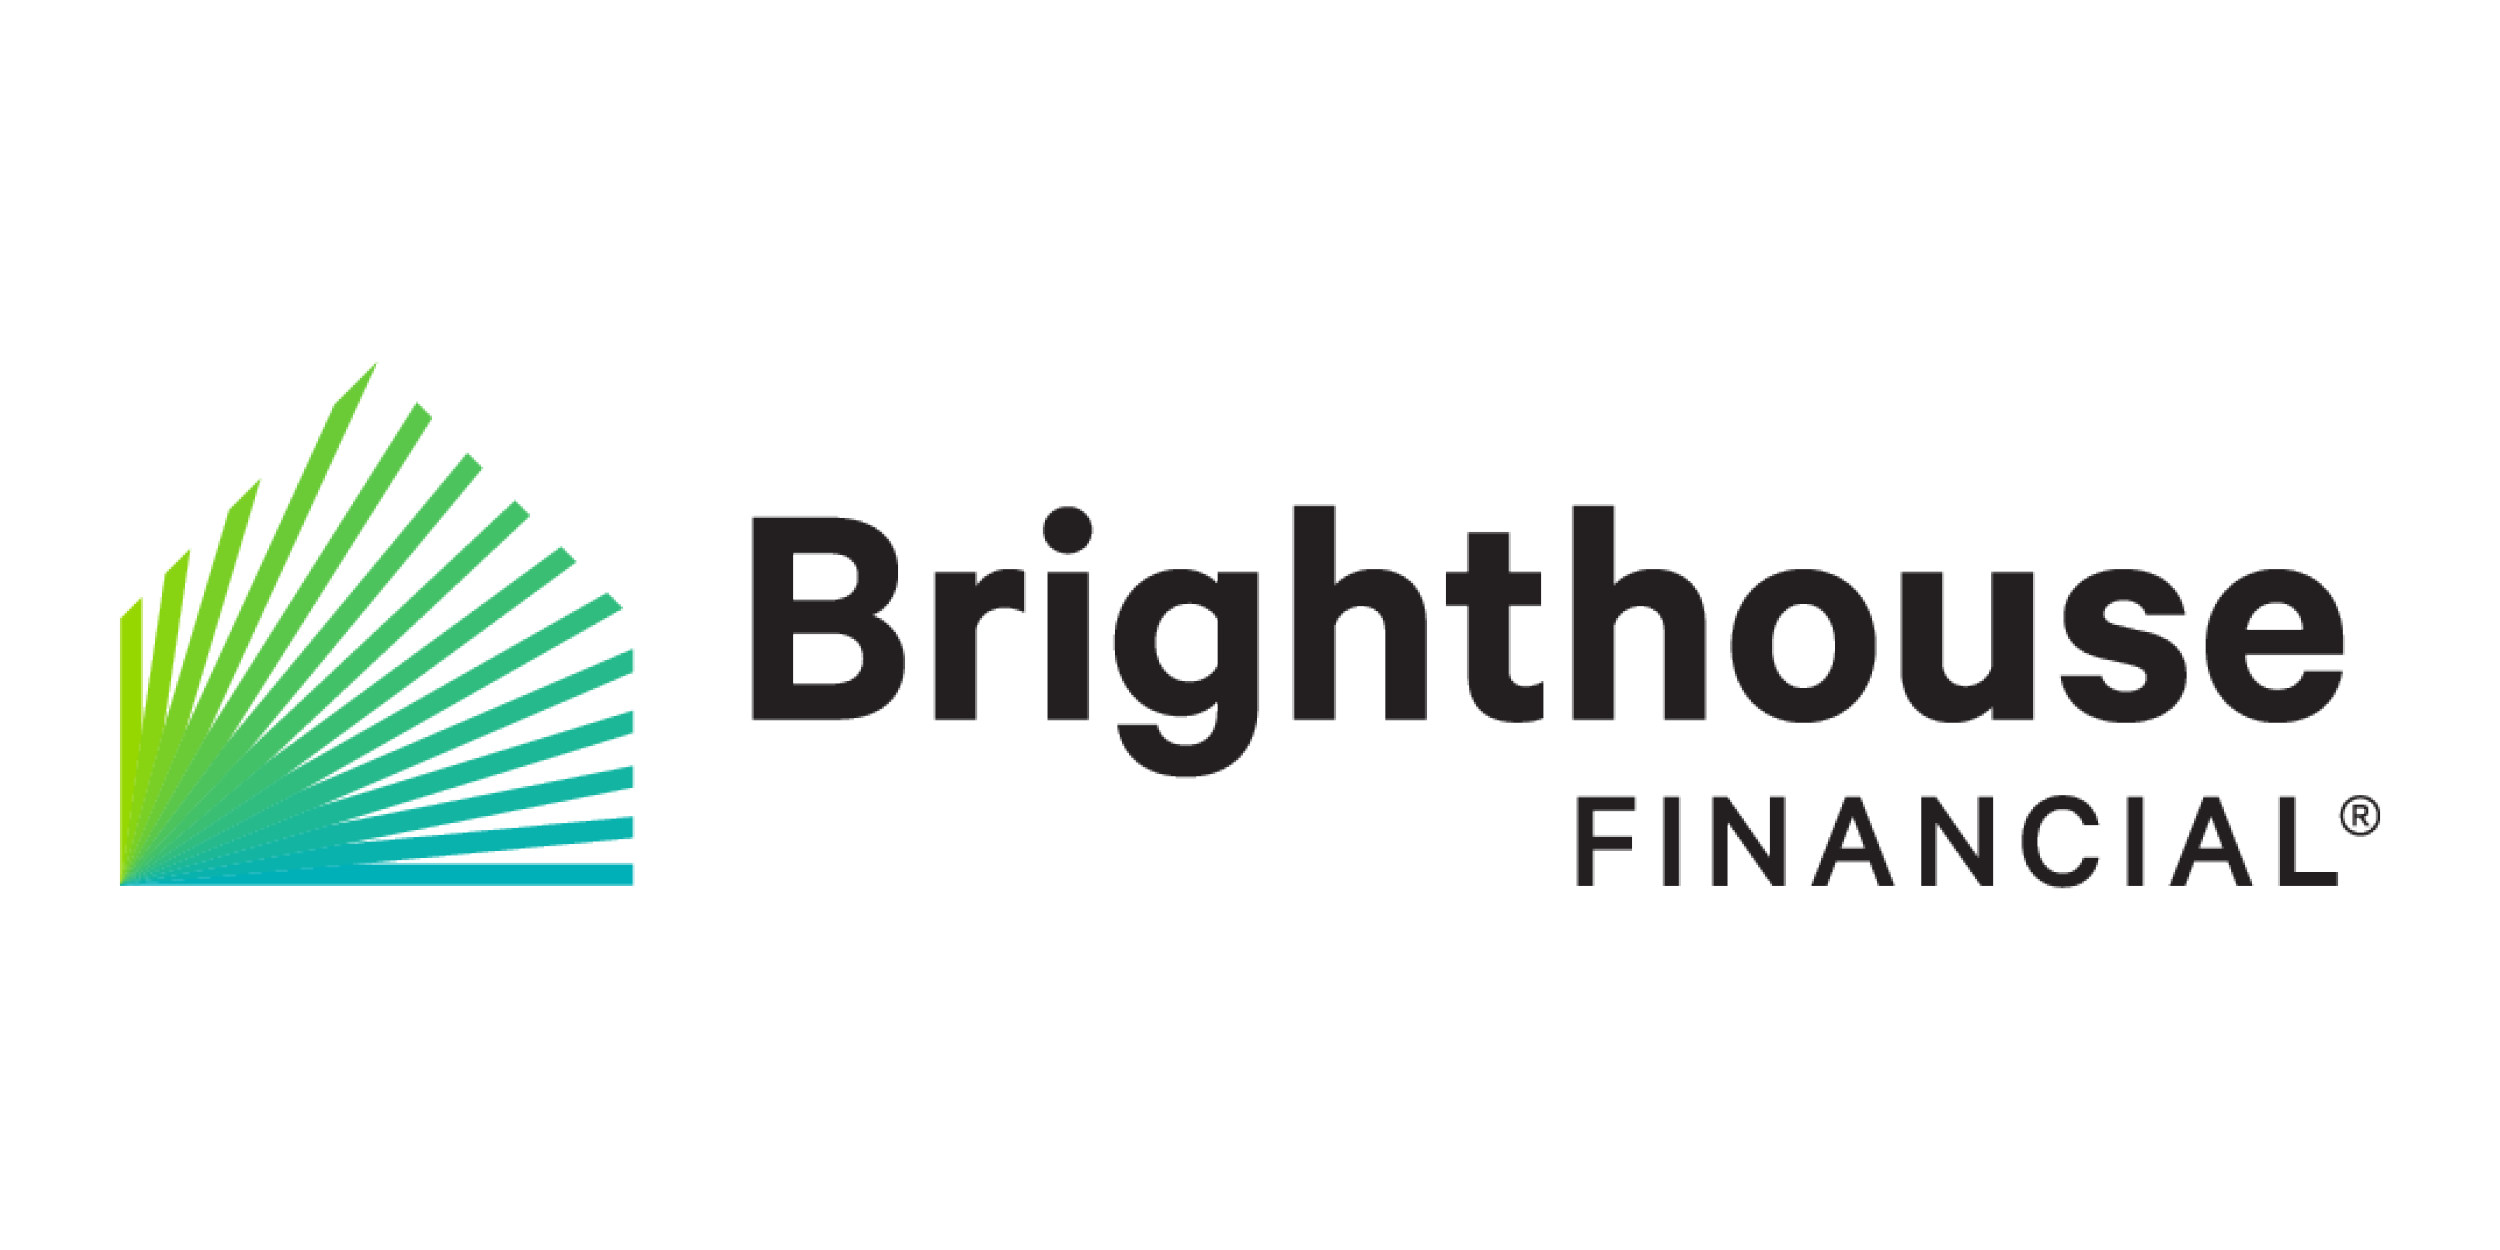 north carolina companies fortune 500 list brighthouse financial